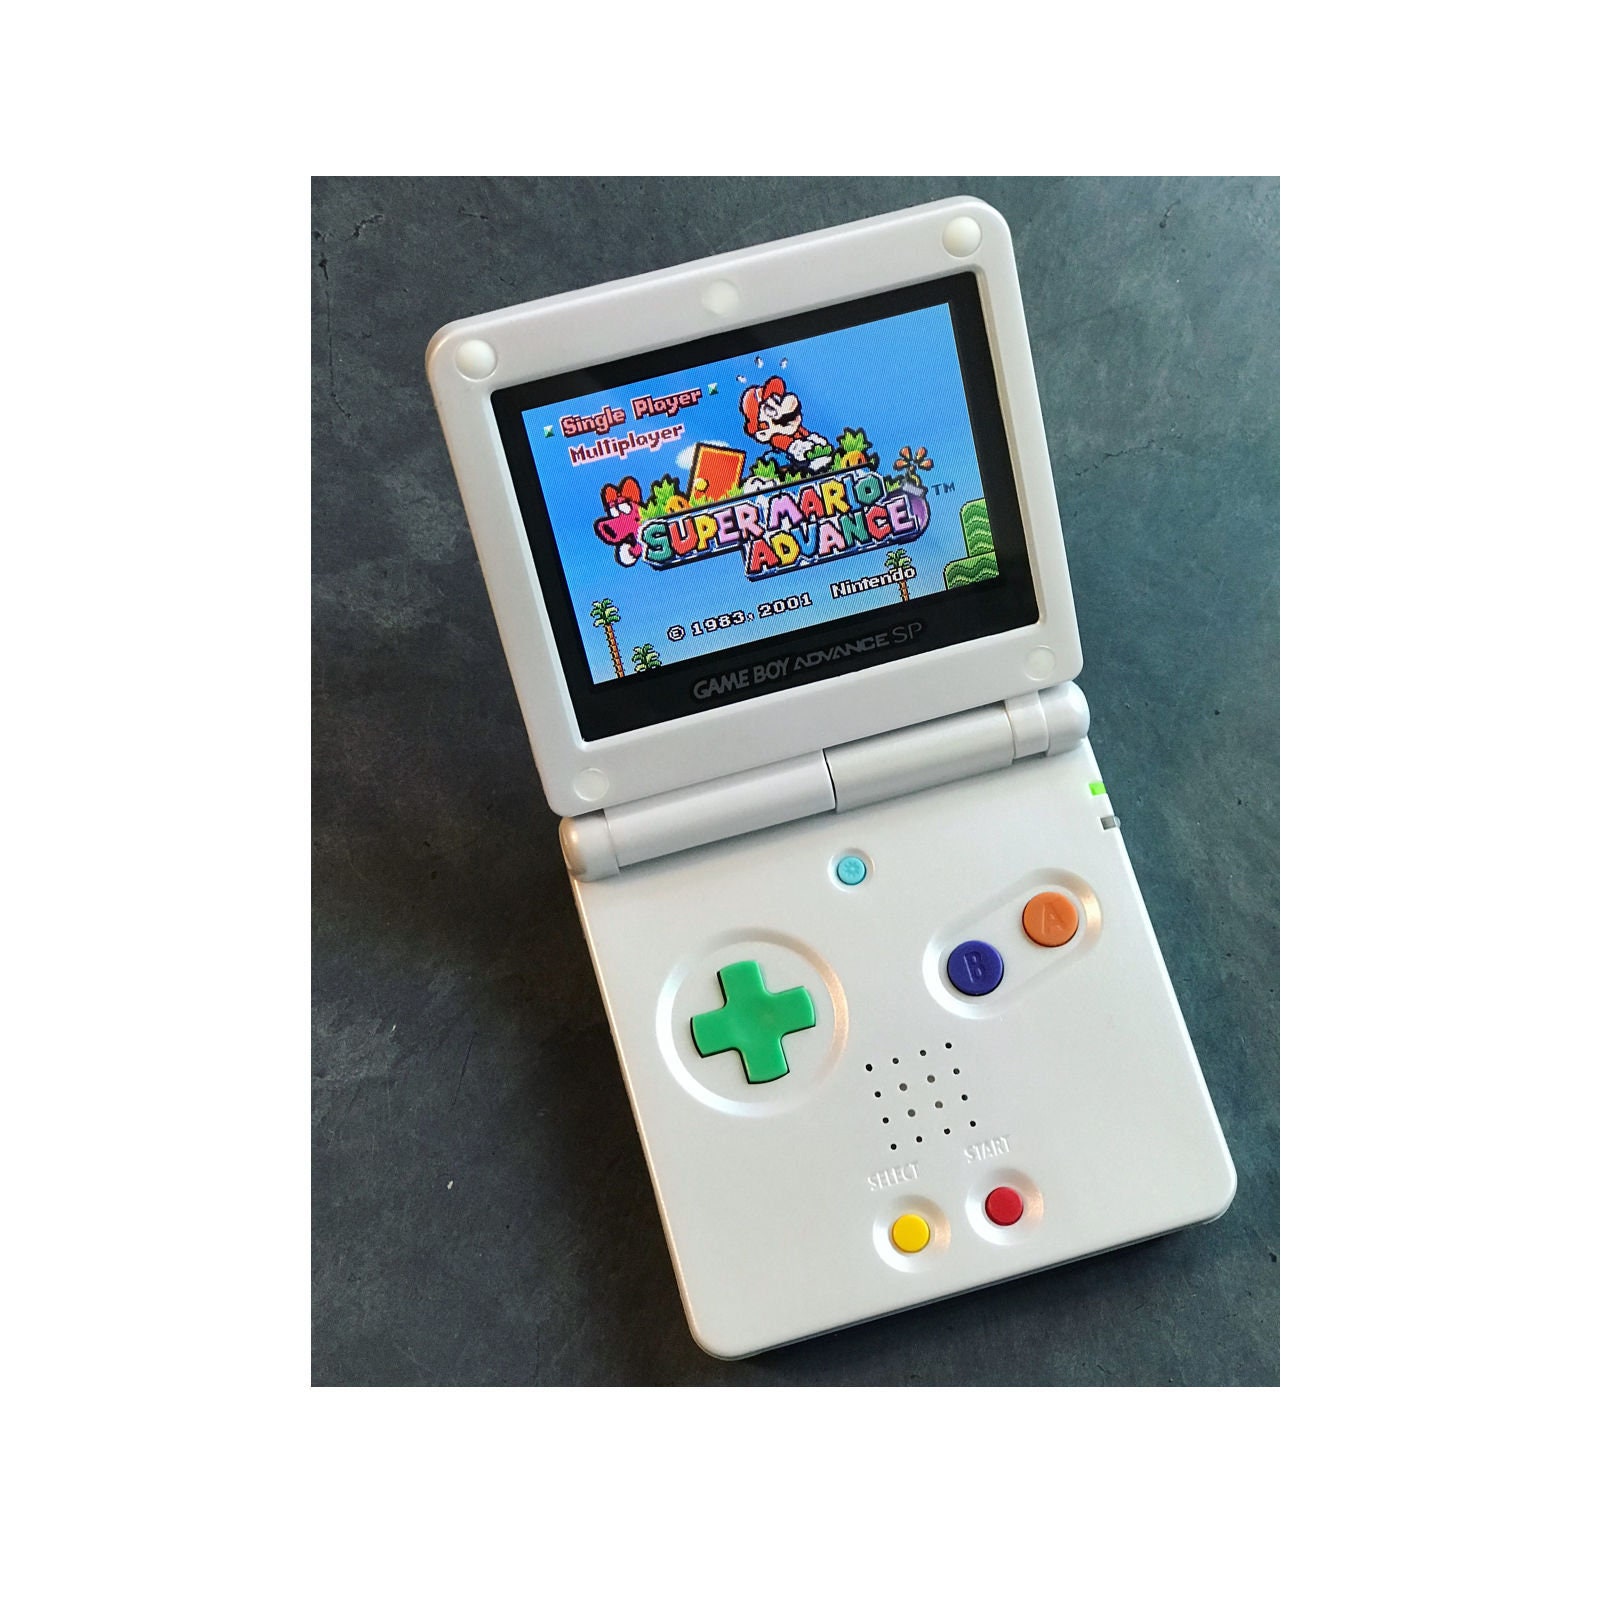 Nintendo Game Boy Advance GBA SP White System AGS 101 Brighter - Etsy